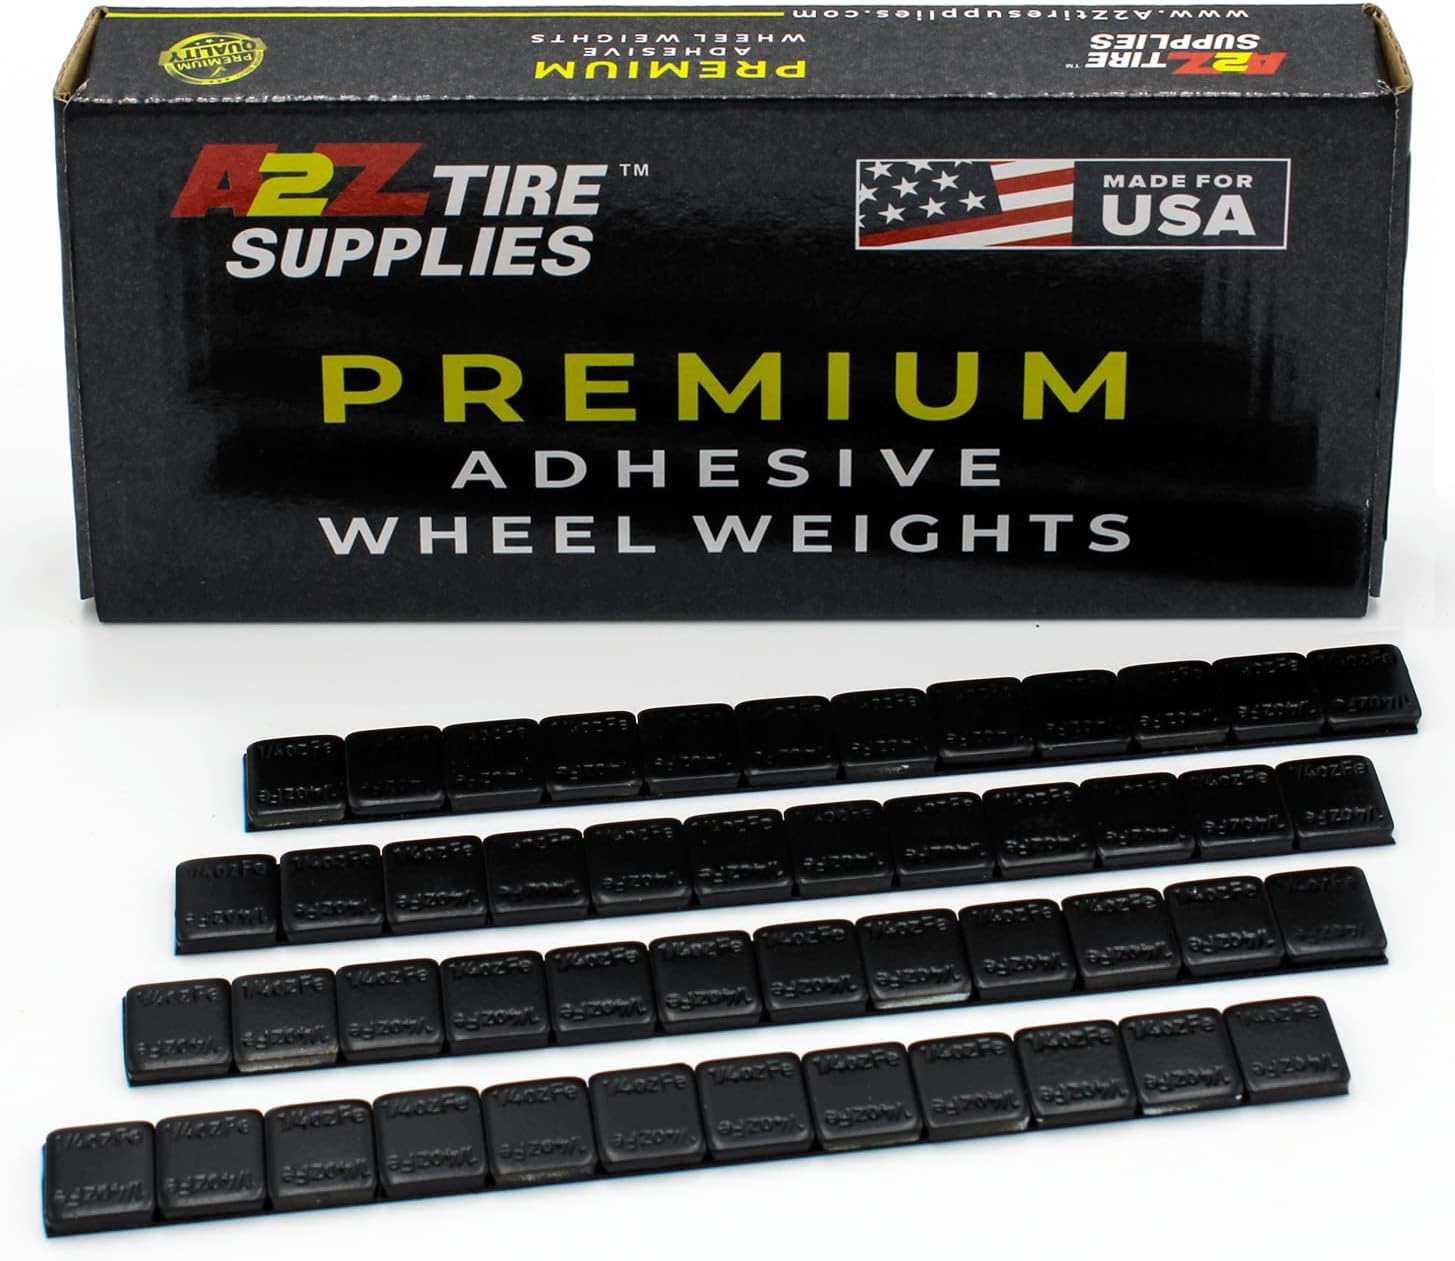 A2Z Tire Supplies 360 Pcs Black Coated FE Low Profile Adhesive Wheel Weight 1/4oz Segments 30 Strips 6 Lbs for Car, SUV, Truck Specially Made for US Market